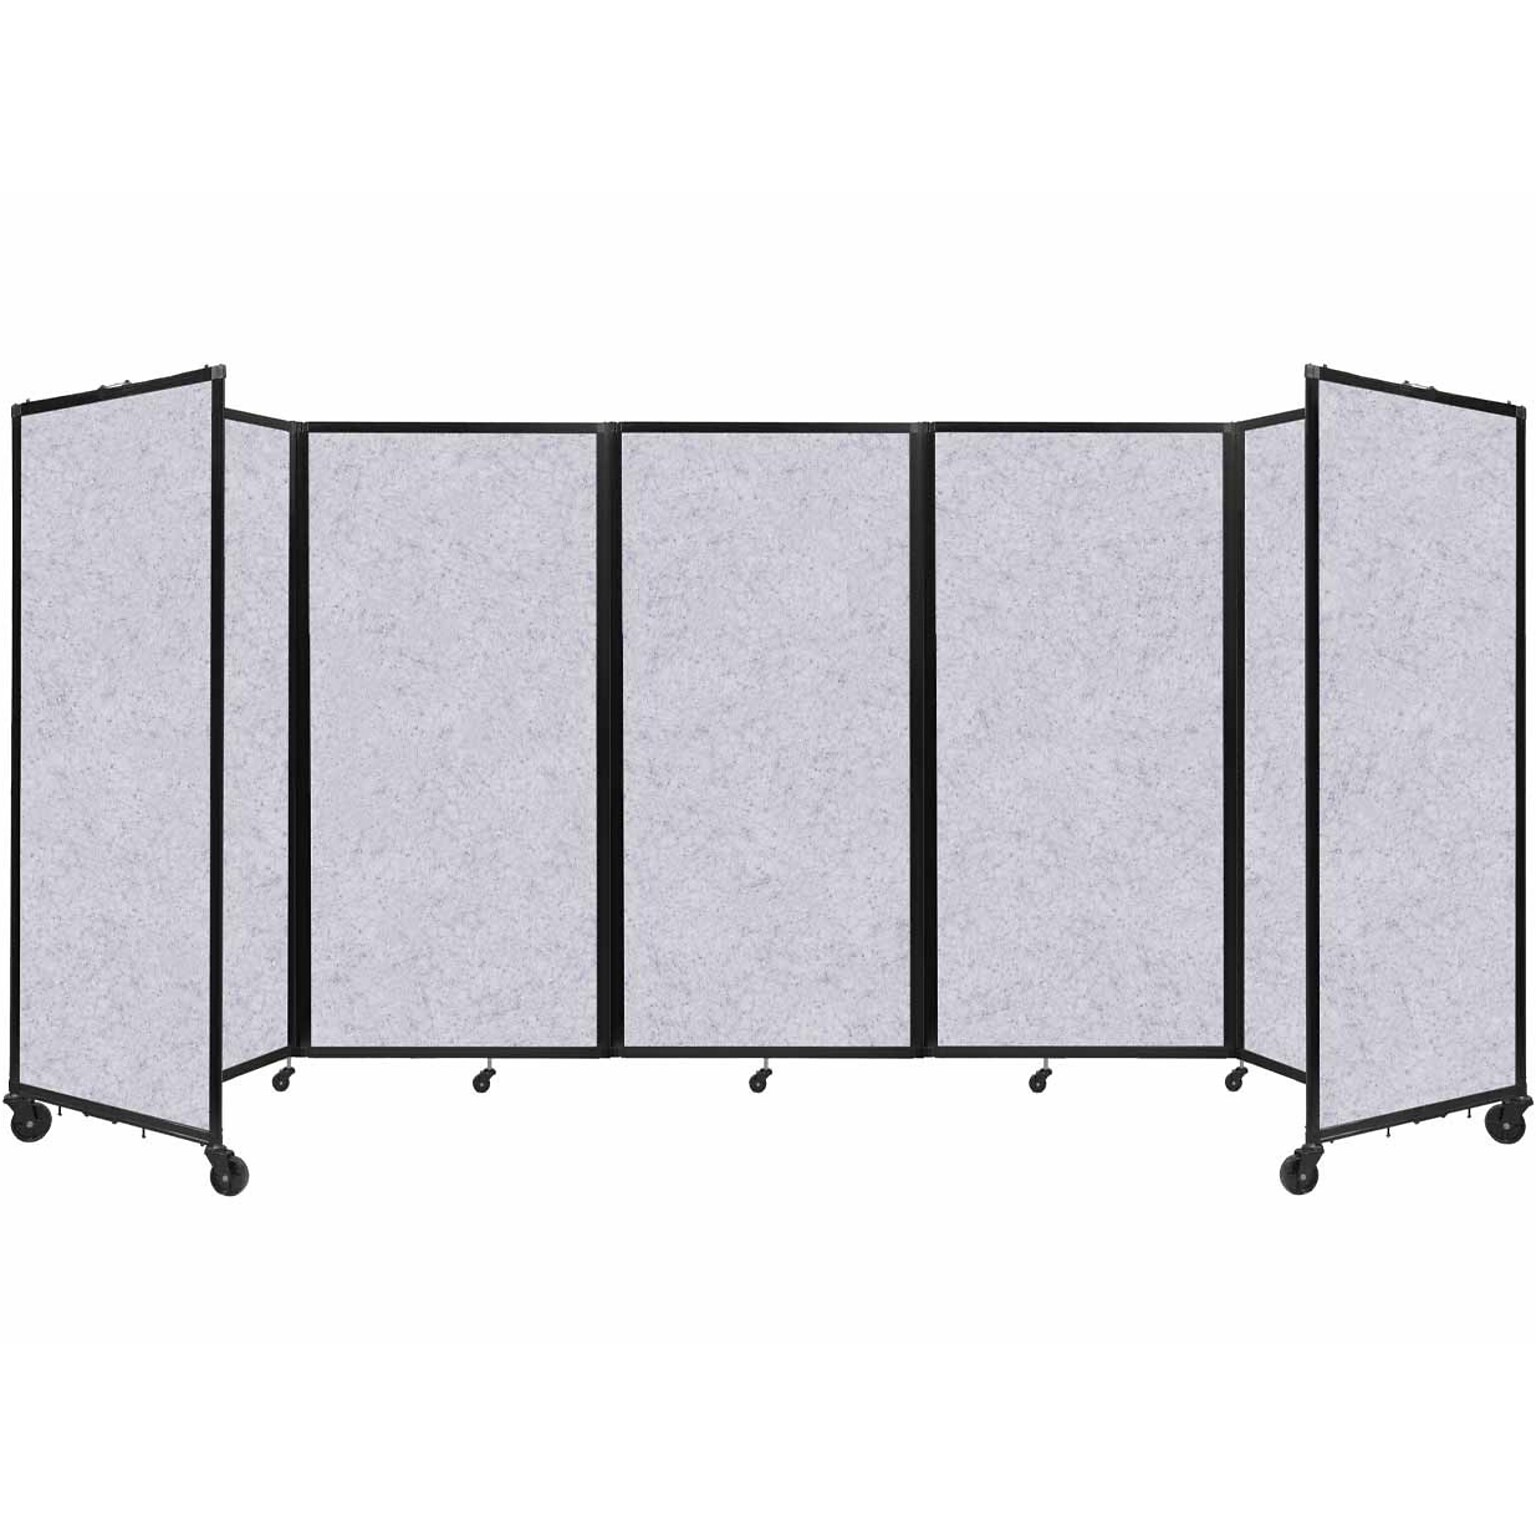 Versare The Room Divider 360 Freestanding Folding Portable Partition, 72H x 168W, Marble Gray SoundSorb Fabric (1932101)